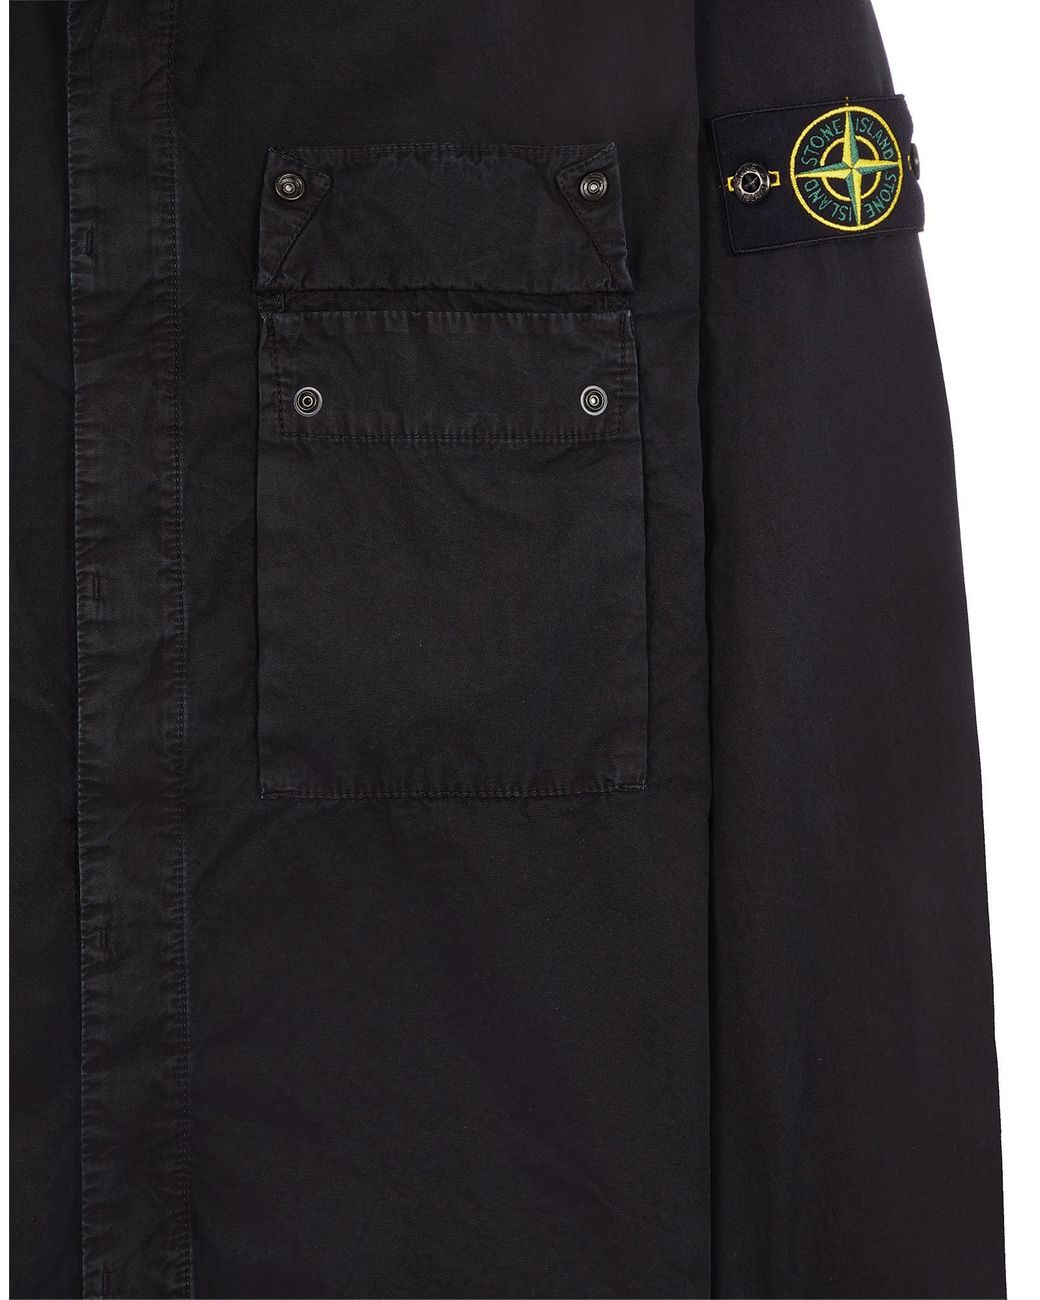 Stone Island Over Shirt Cotton in Black for Men | Lyst